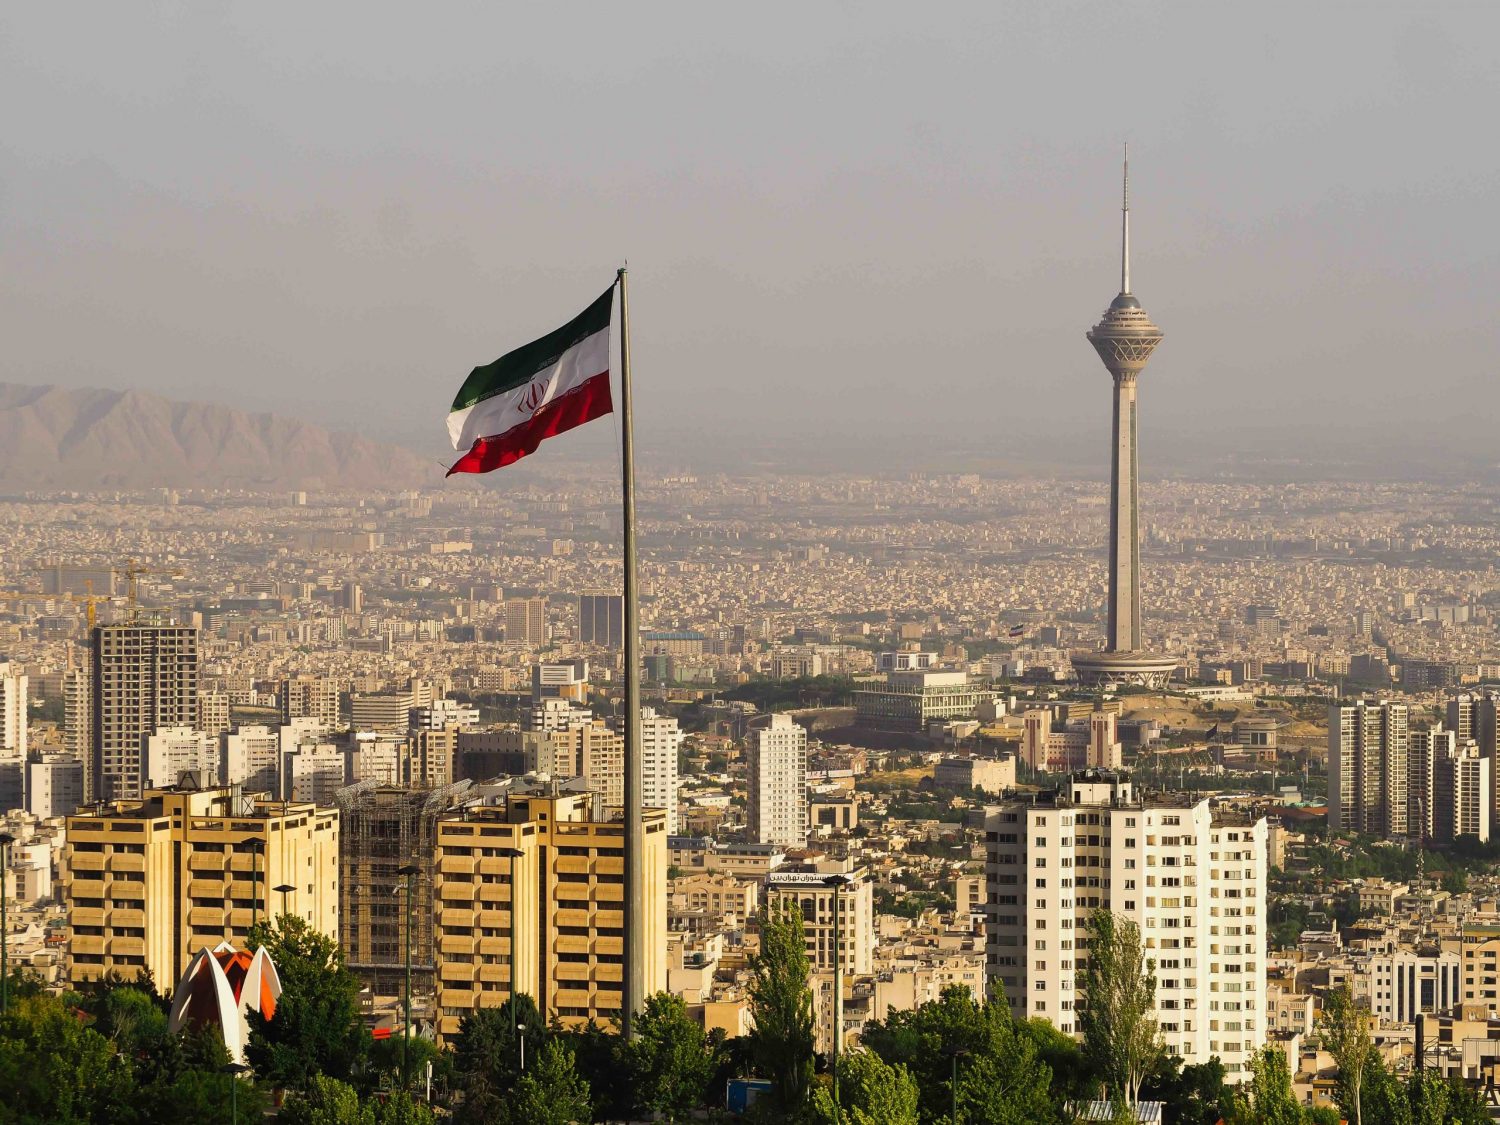 Over 1,000 Bitcoin Miners Granted Licenses in Iran: Report